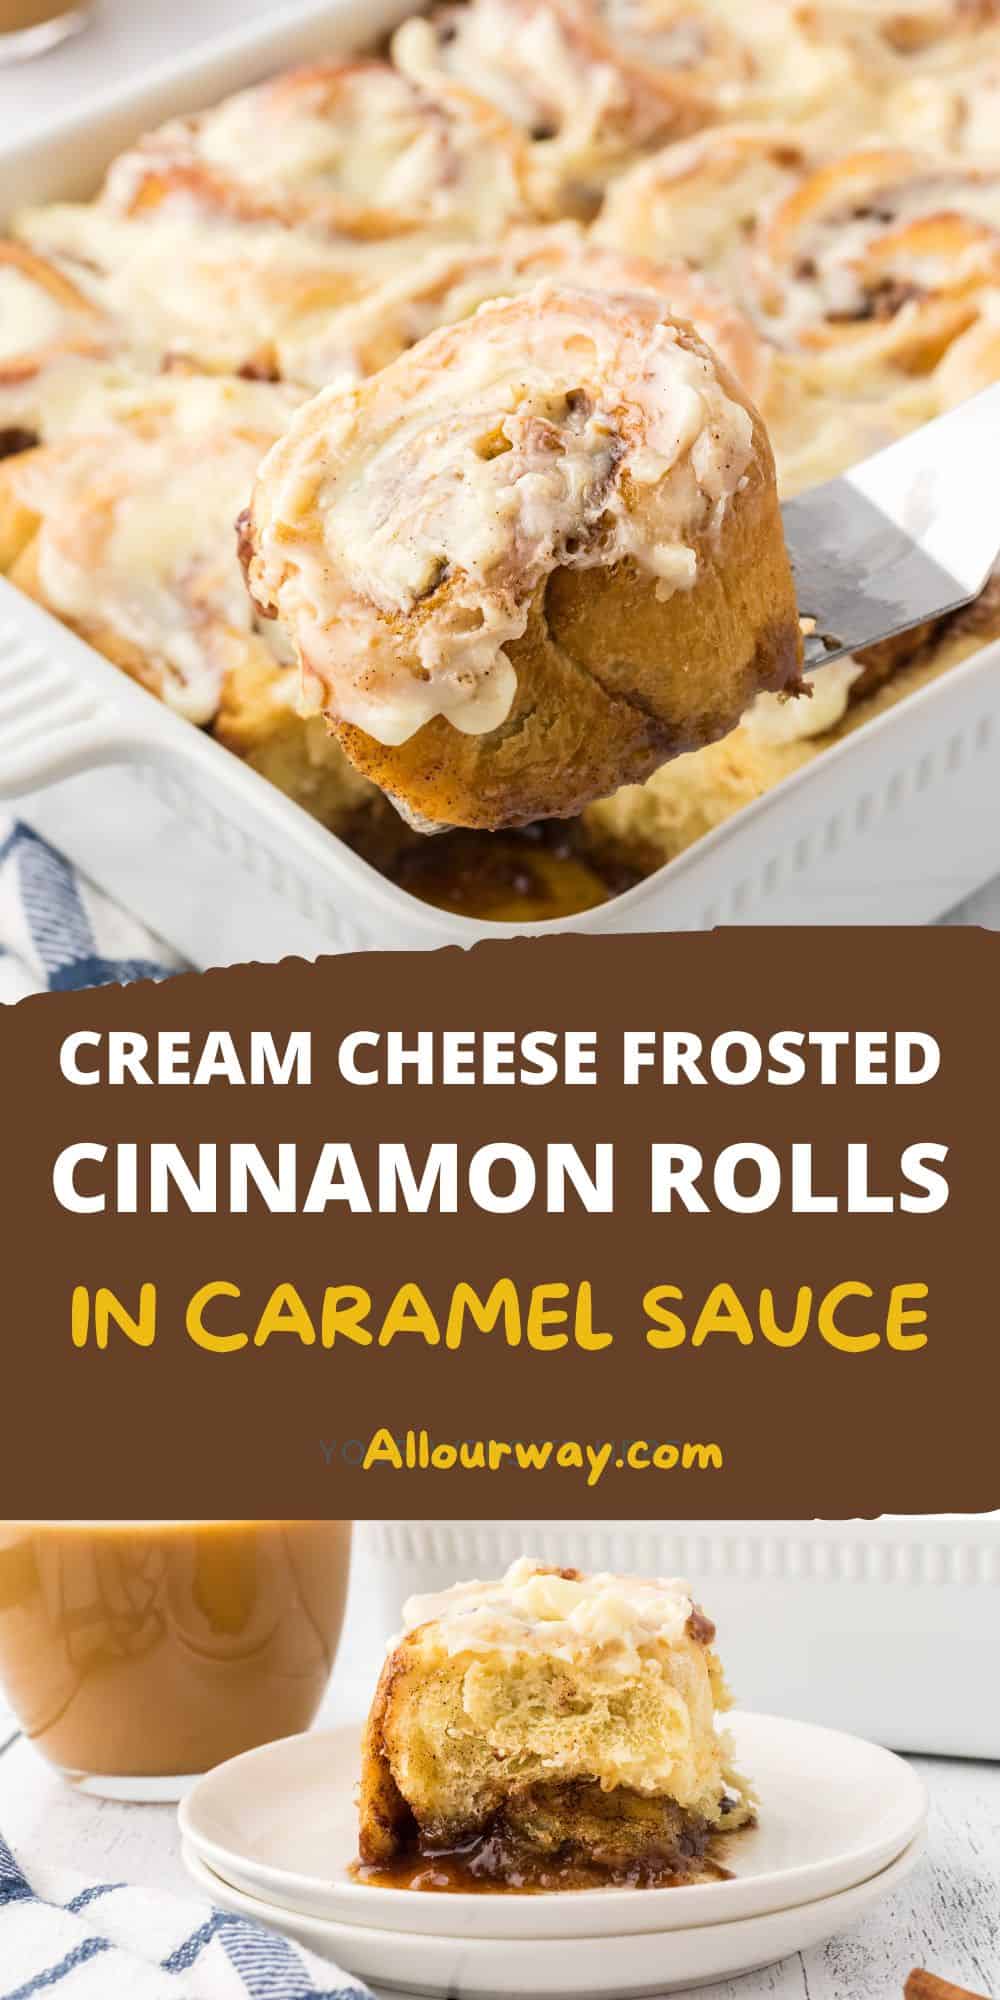 Breakfast has officially become an extraordinary experience with these downright addictive homemade cinnamon rolls drenched in a mouthwatering cinnamon caramel sauce and elevated with a decadent cream cheese frosting. These family-favorite yeast rolls are pure morning magic!